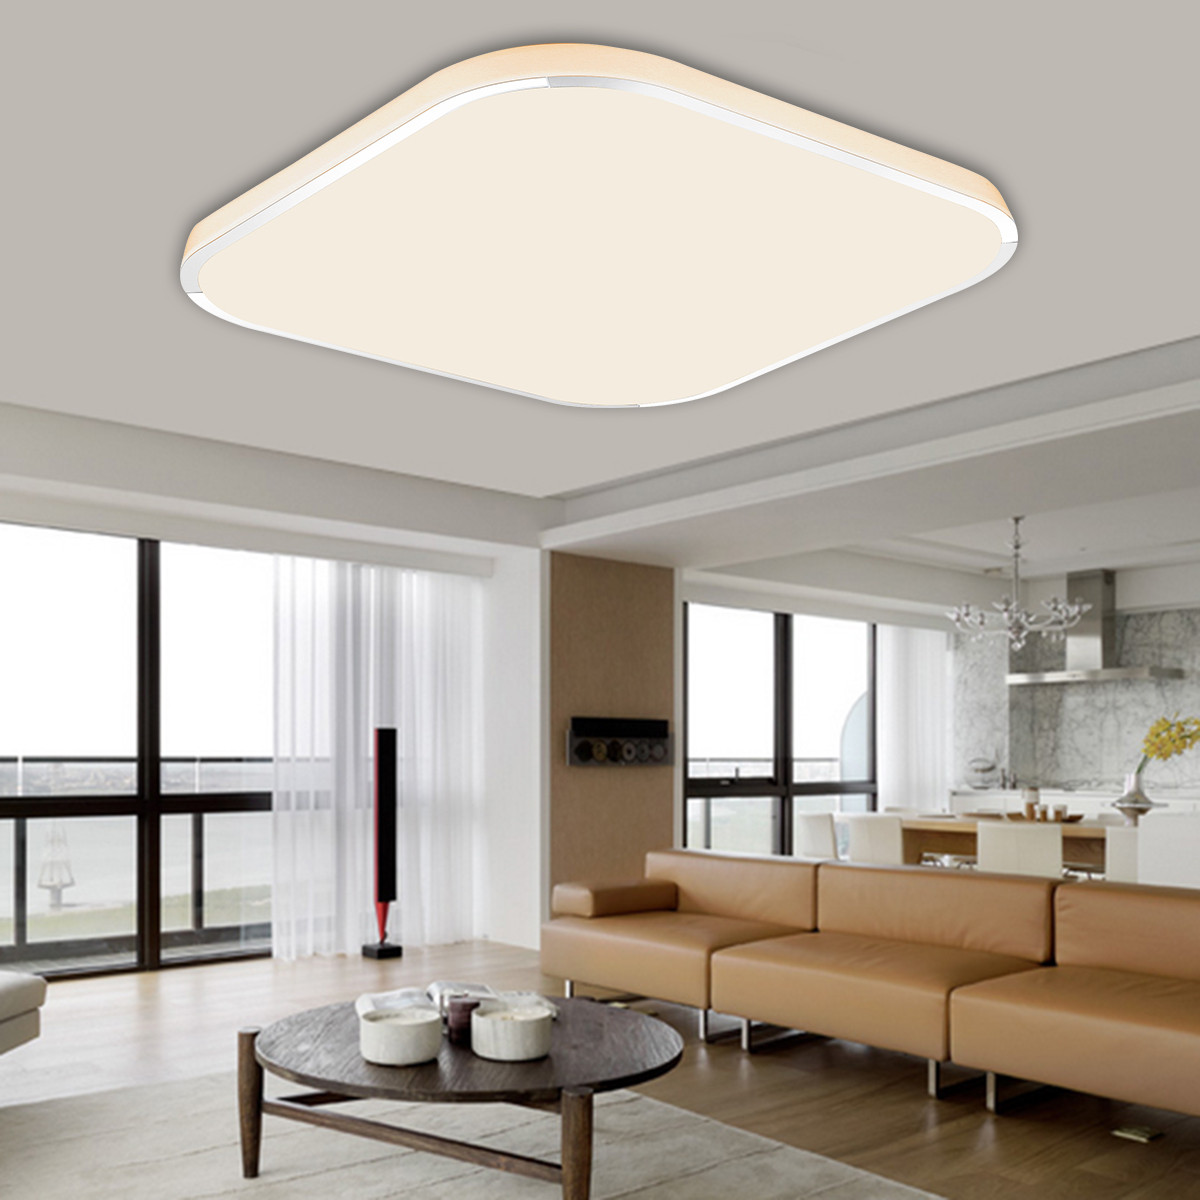 Led Kitchen Ceiling Lights Fresh 36w Dimmable Led Ceiling Down Light Bathroom Fitting Of Led Kitchen Ceiling Lights 1 